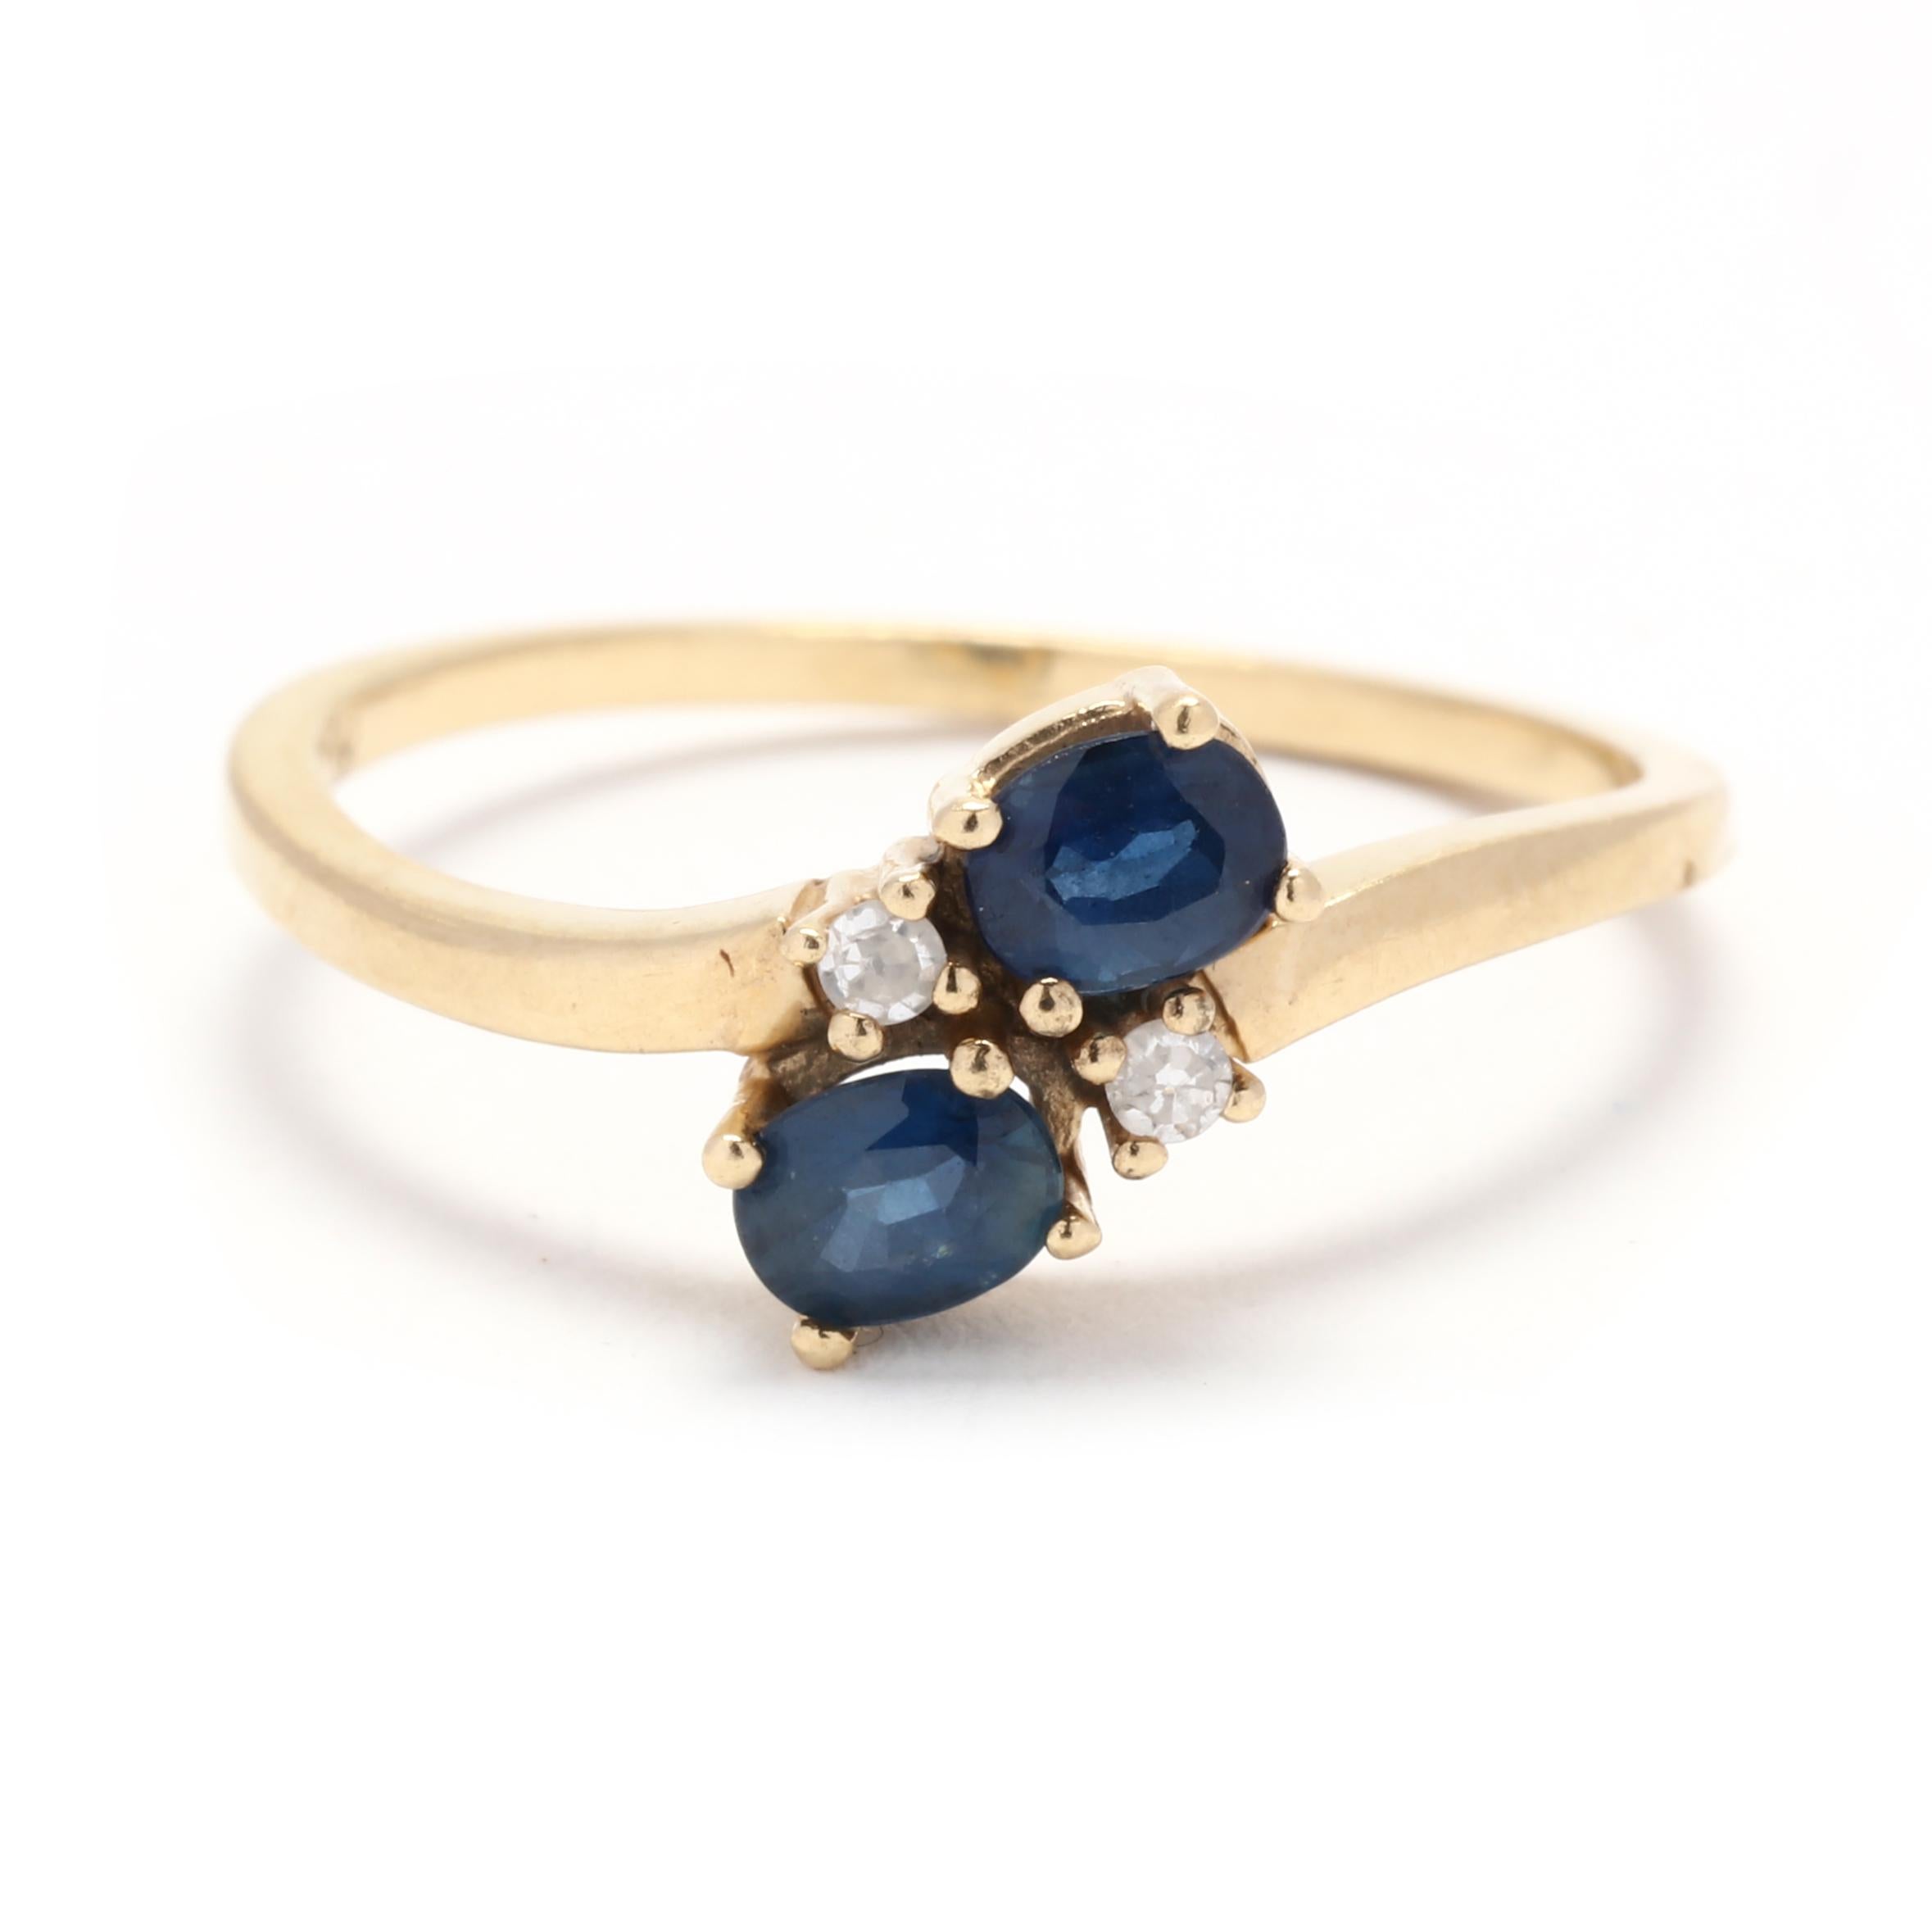 0.54ctw Sapphire Diamond Toi et Moi Ring, 18K Yellow Gold, Ring Size 6.5, Simple For Sale